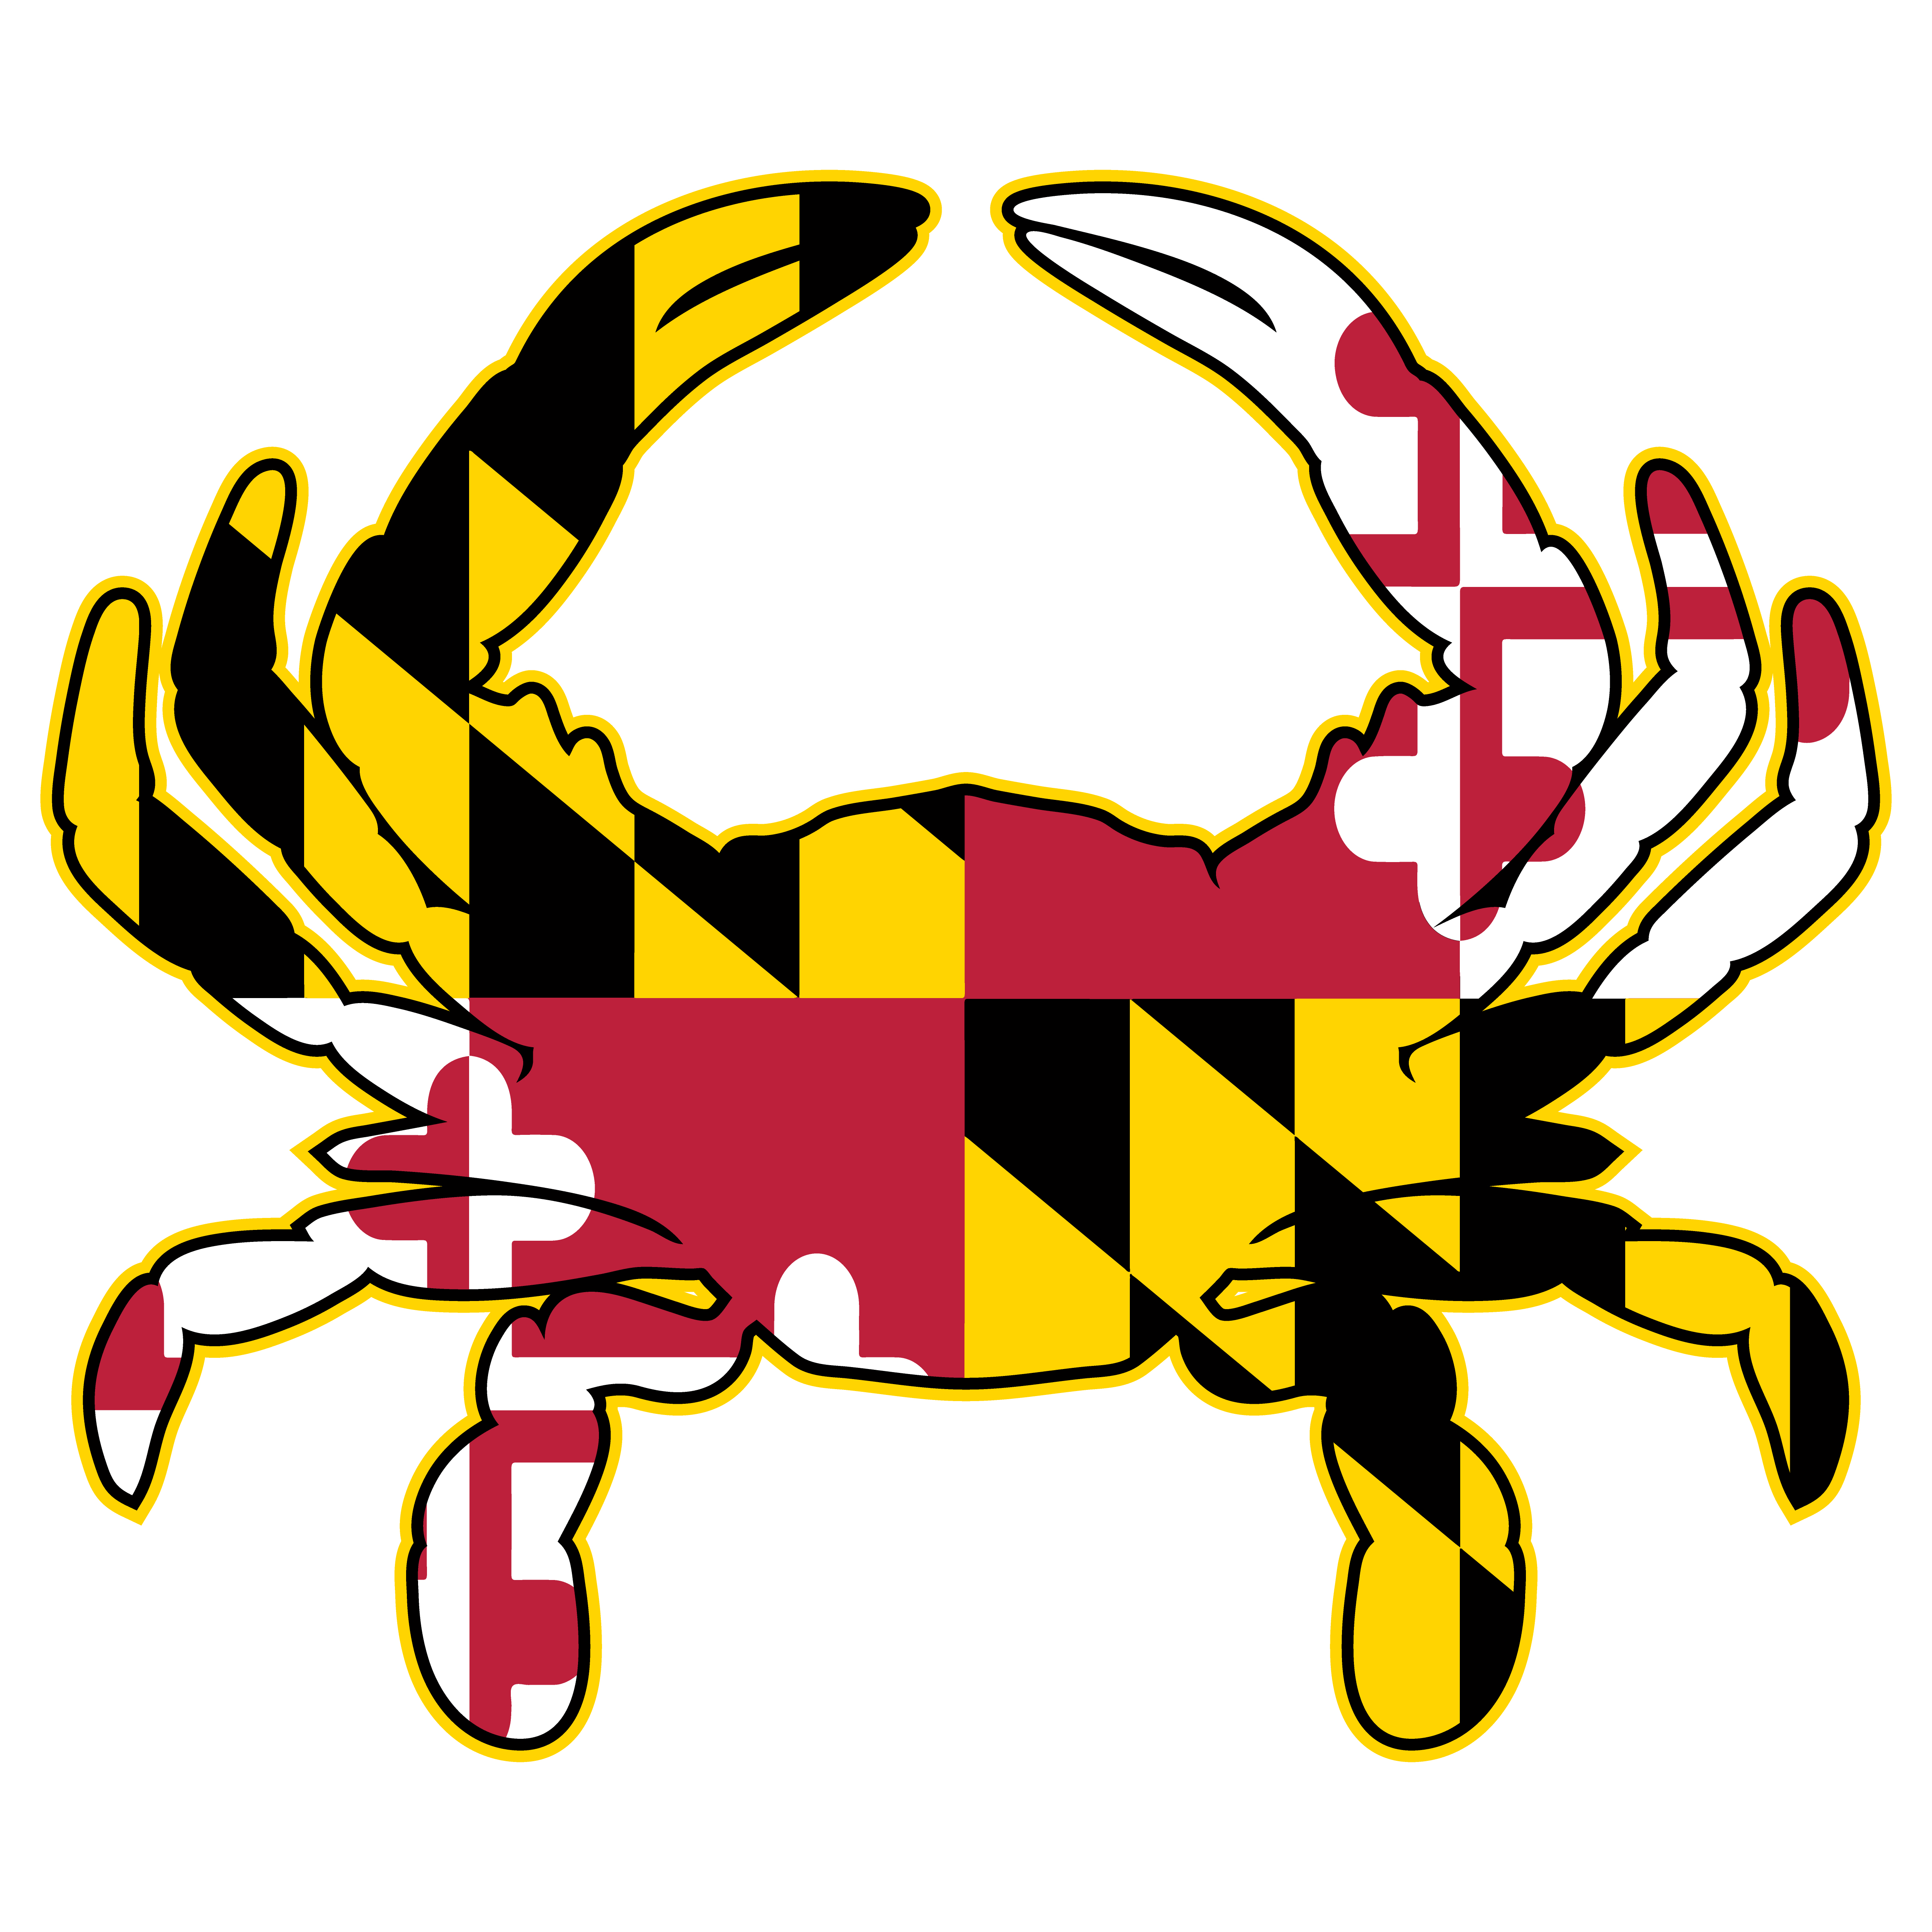 Download Maryland Flag Crab Isolated Vector Illustration - Download ...